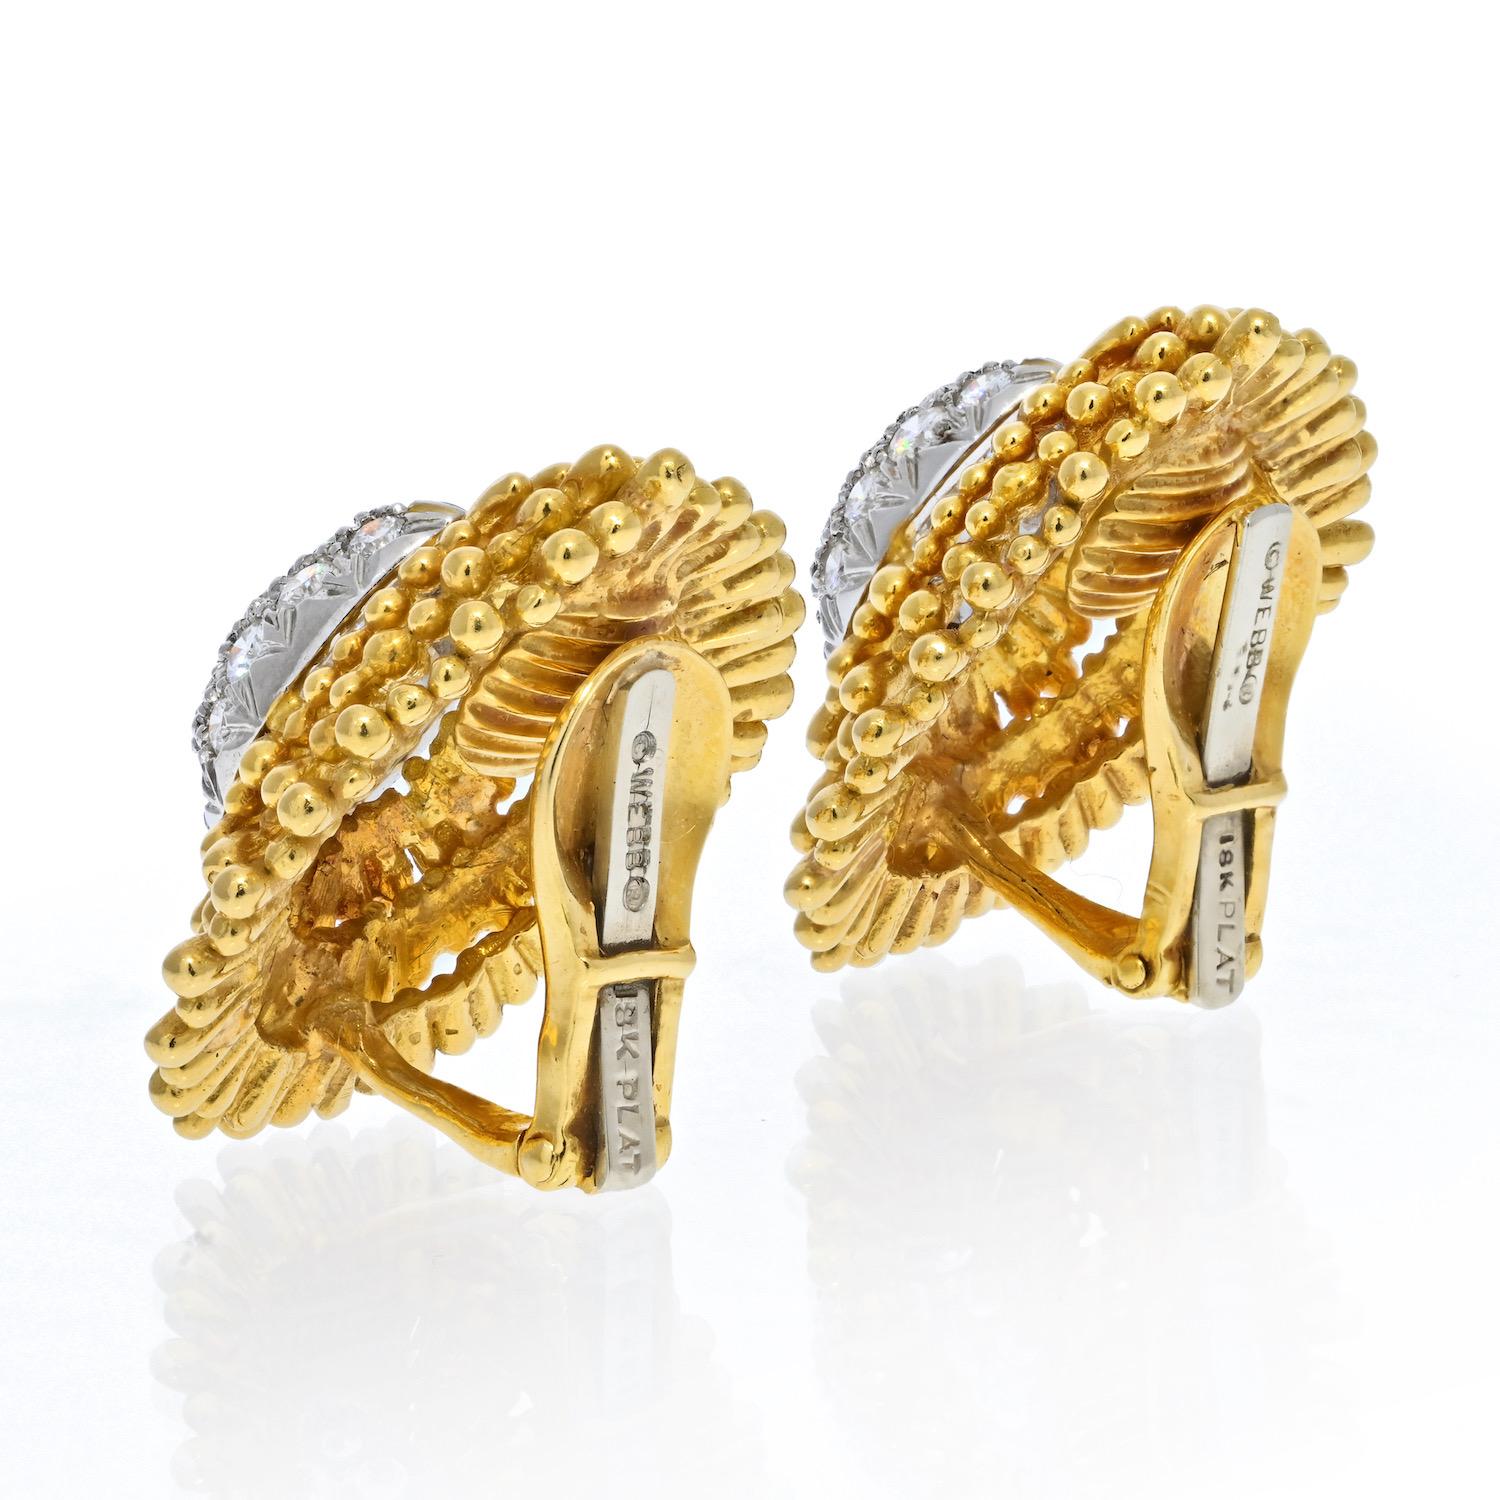 David Webb Pair of Gold, Platinum and Diamond Earclips
18 kt., centering 2 pear-shaped domed platinum panels pavé-set with 42 round diamonds ap. 2.15 cts., surrounded by three tiered rows of ribbed gold, signed Webb, ap. 20.5 dwts.
Diamonds: